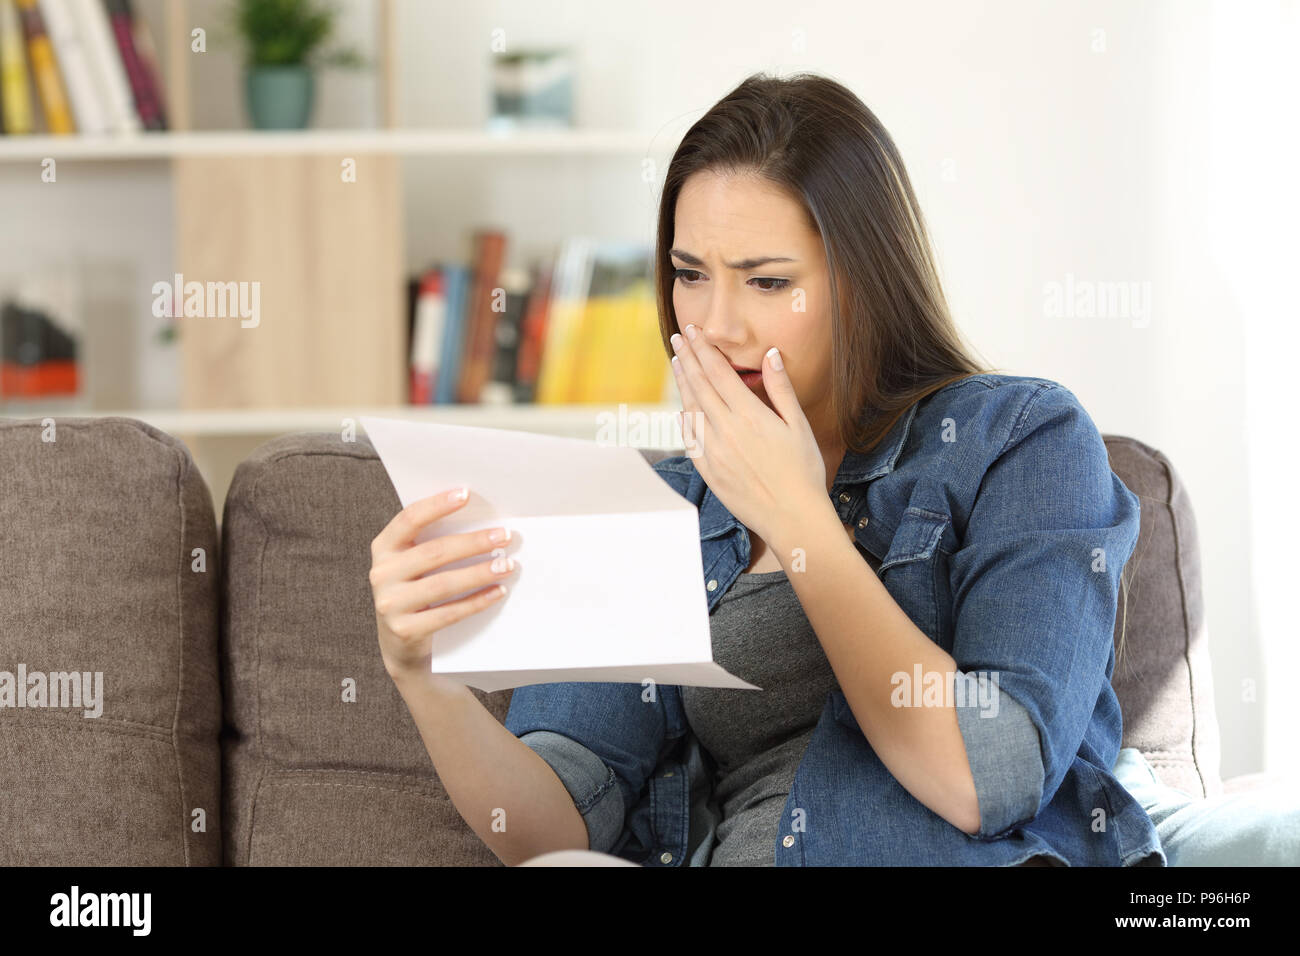 Sad woman reading bad news in a paper letter sitting on a couch in the living room at home Stock Photo